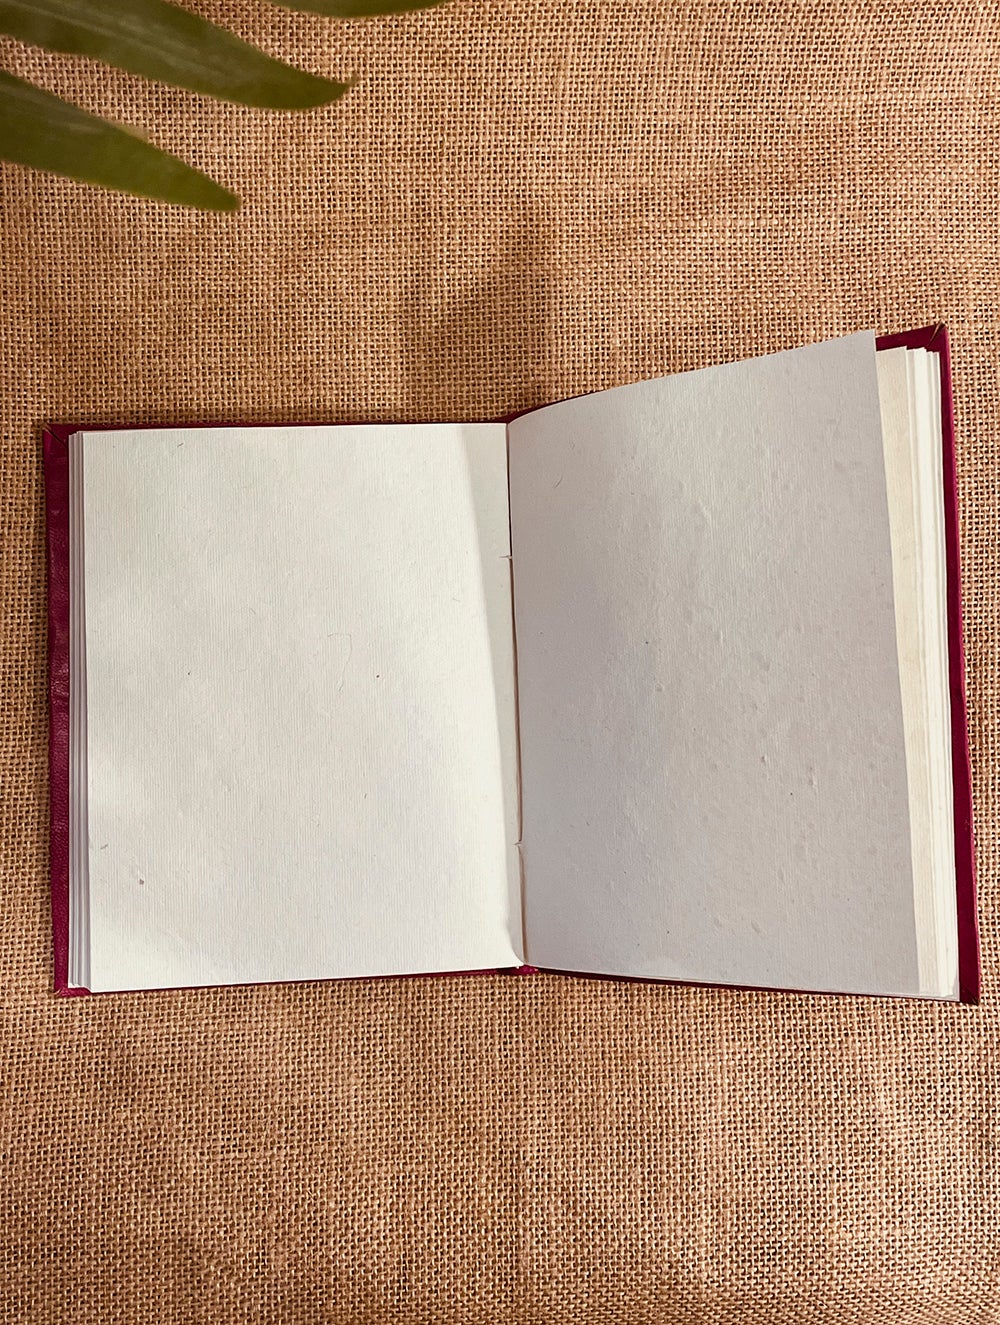 Load image into Gallery viewer, Handcrafted Cutwork Leather Diary - Magenta (Handmade Paper)